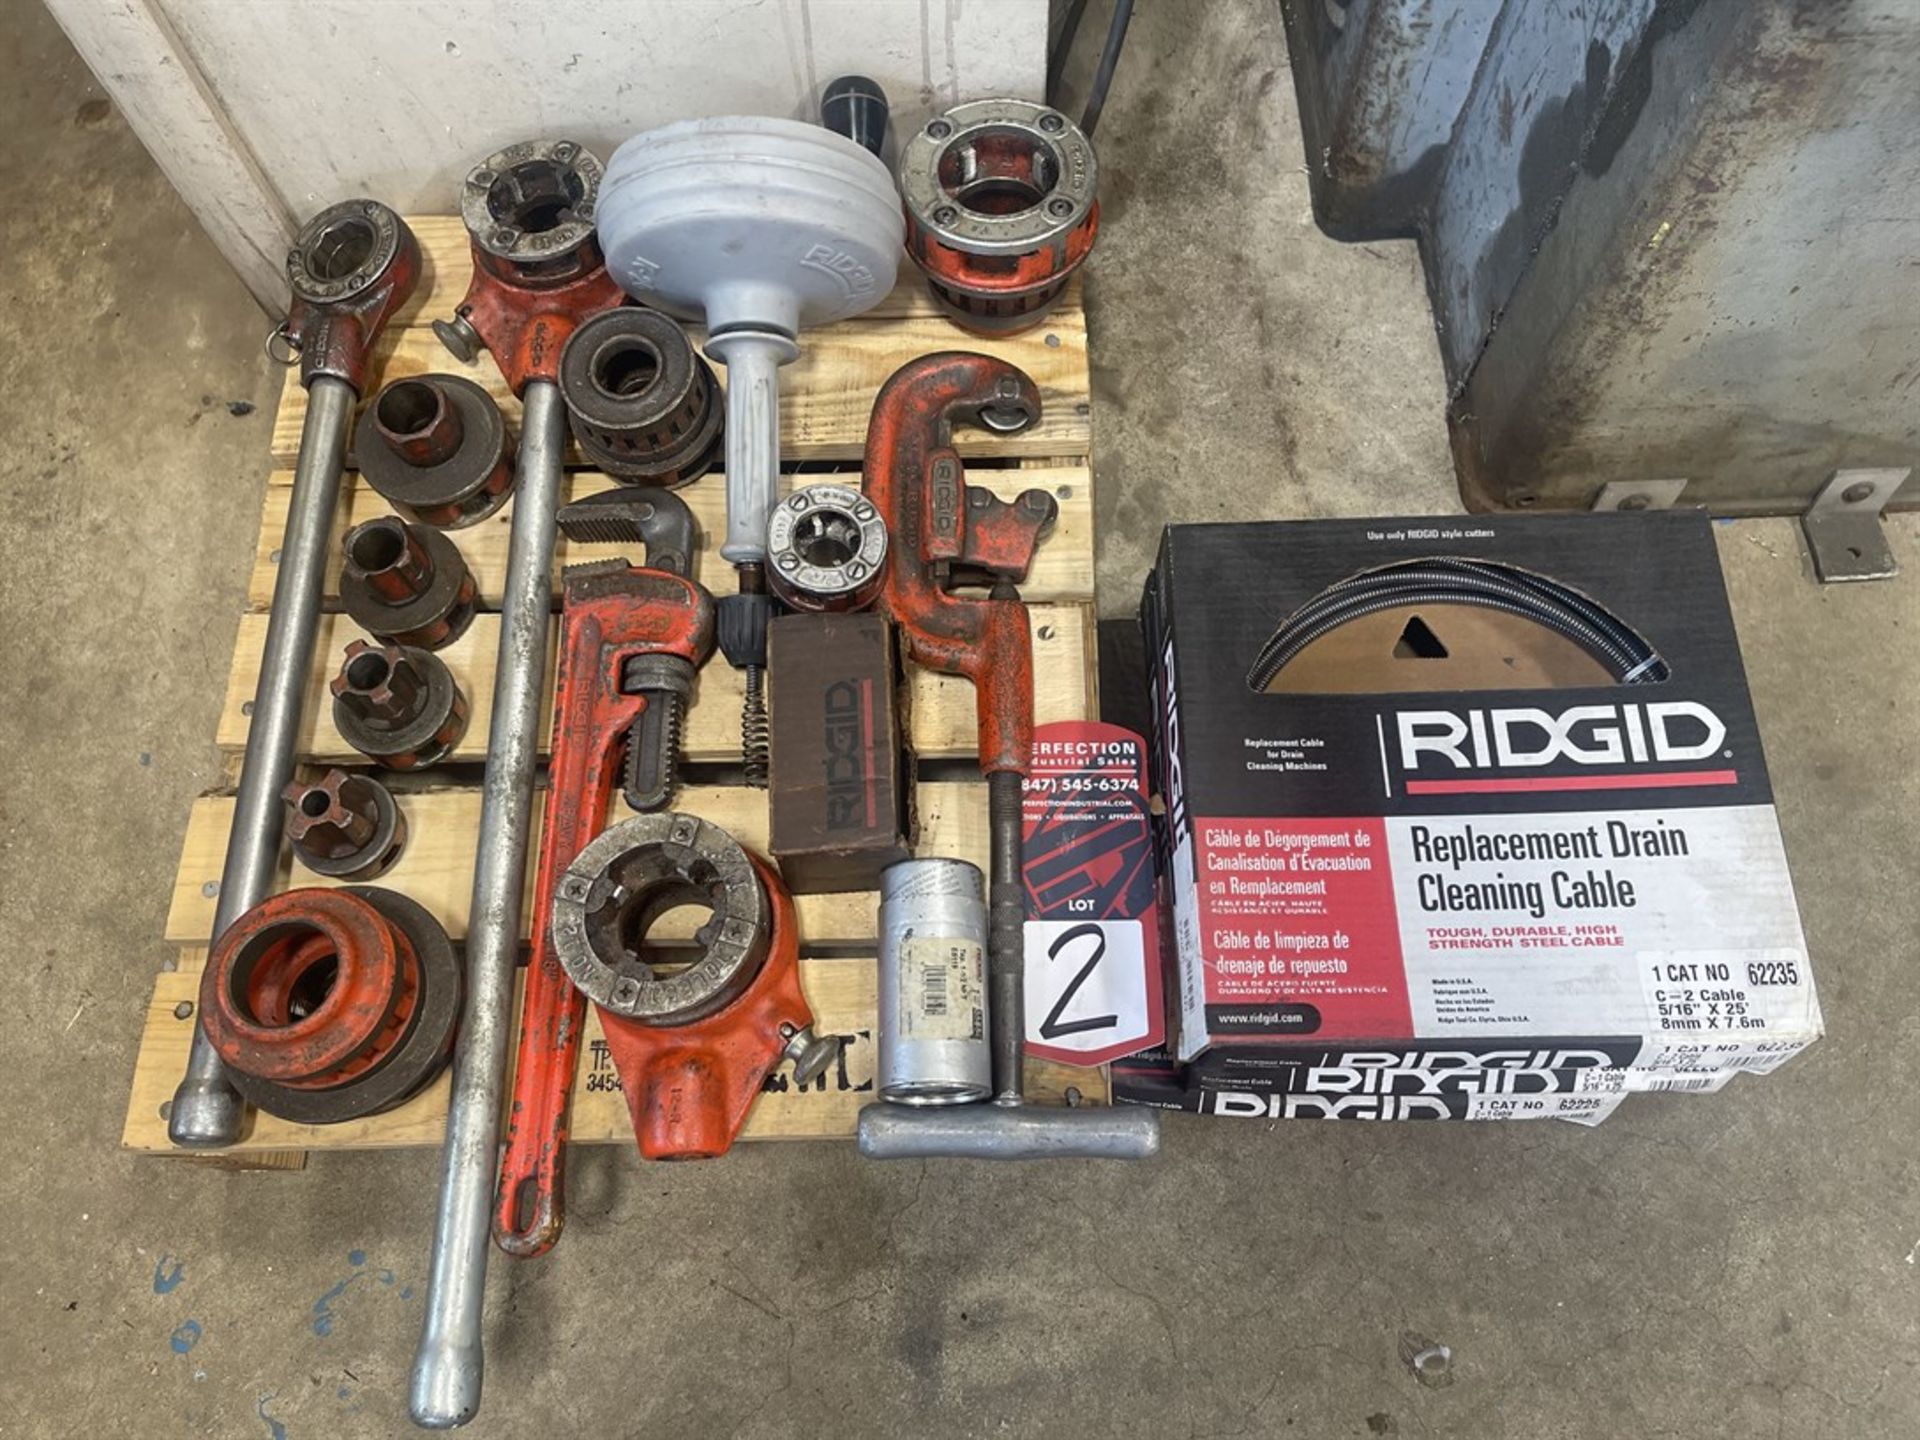 Lot Comprising Ridgid Pipe Threader Dies, Handles, Cleaning Cable and Pipe Wrench